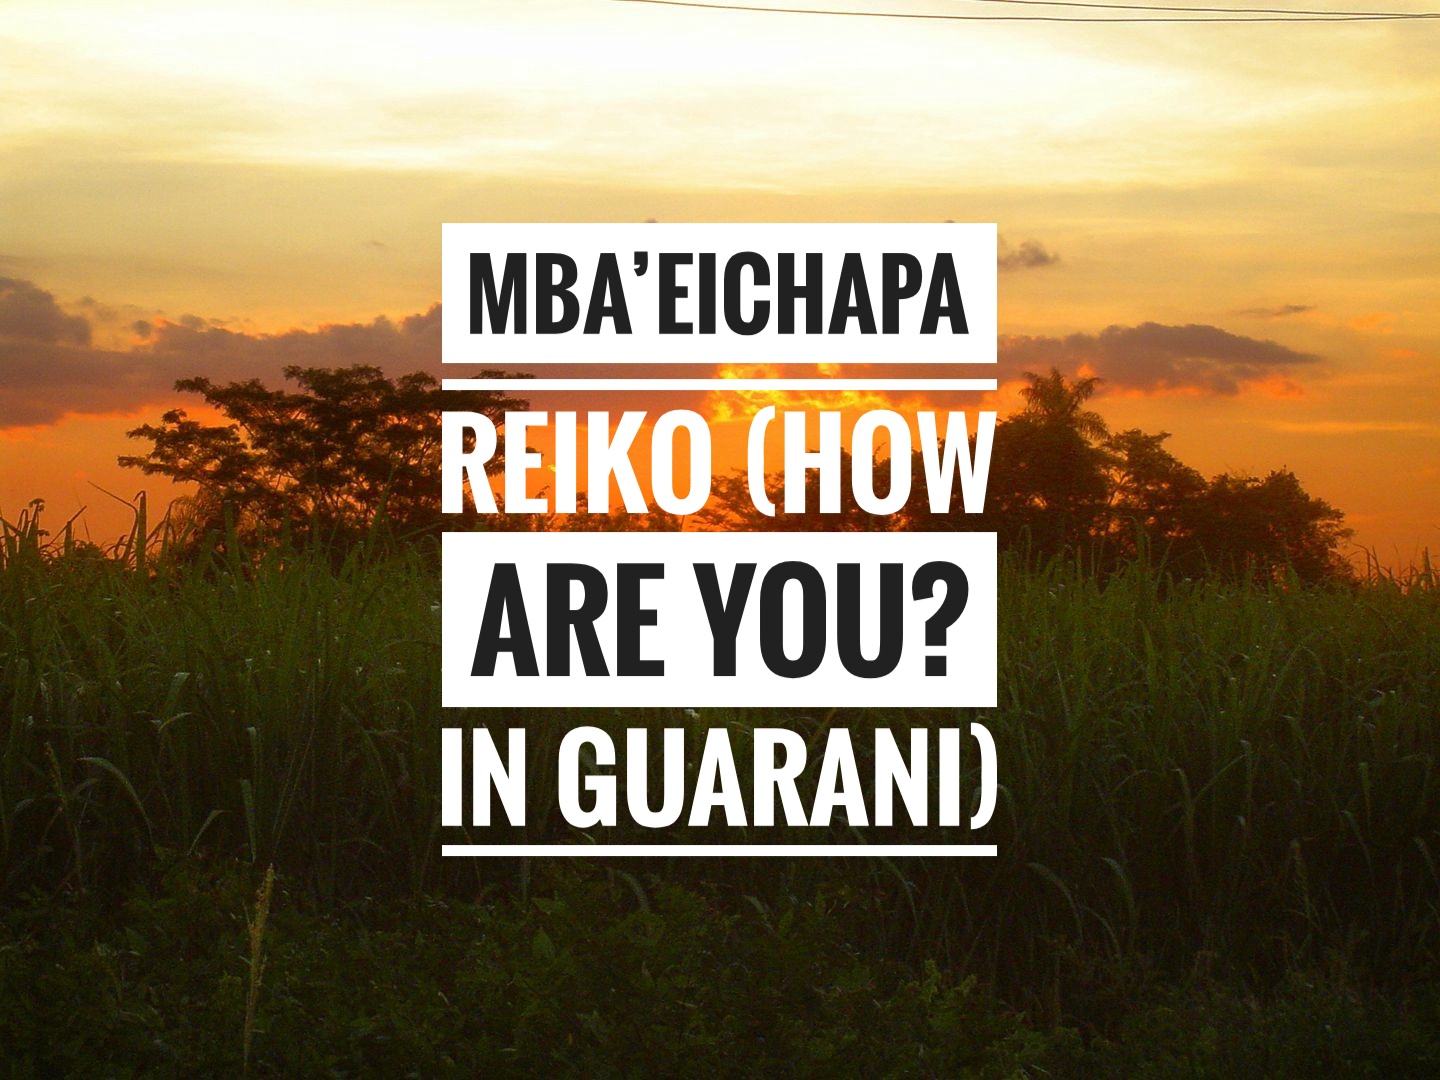 Mba’eichapa reiko? Do you know what that means? Read the Treasures of Traveling blog post to find out!